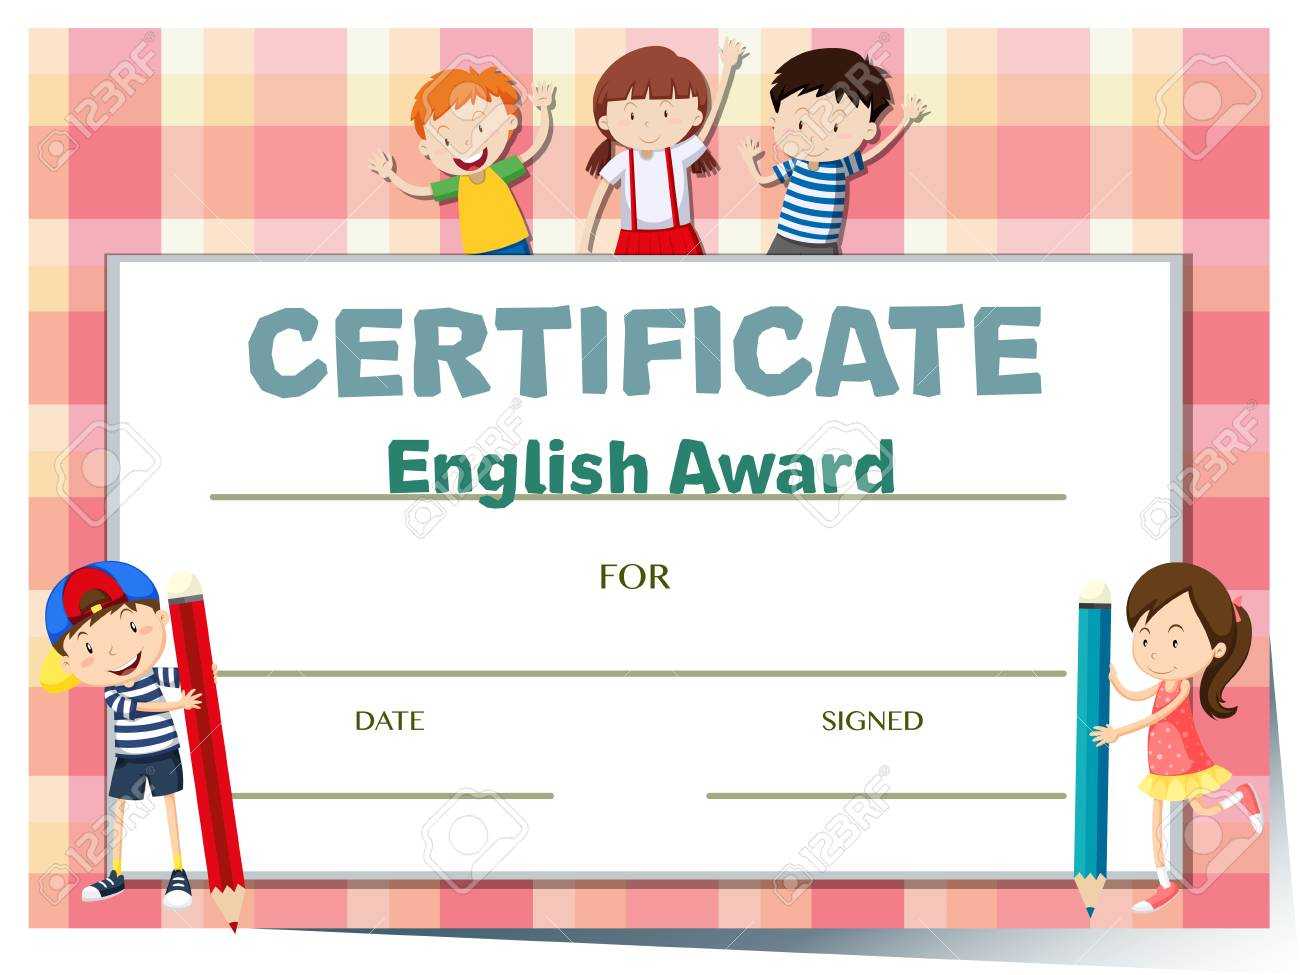 Certificate Template For English Award With Many Kids Illustration Regarding Children's Certificate Template